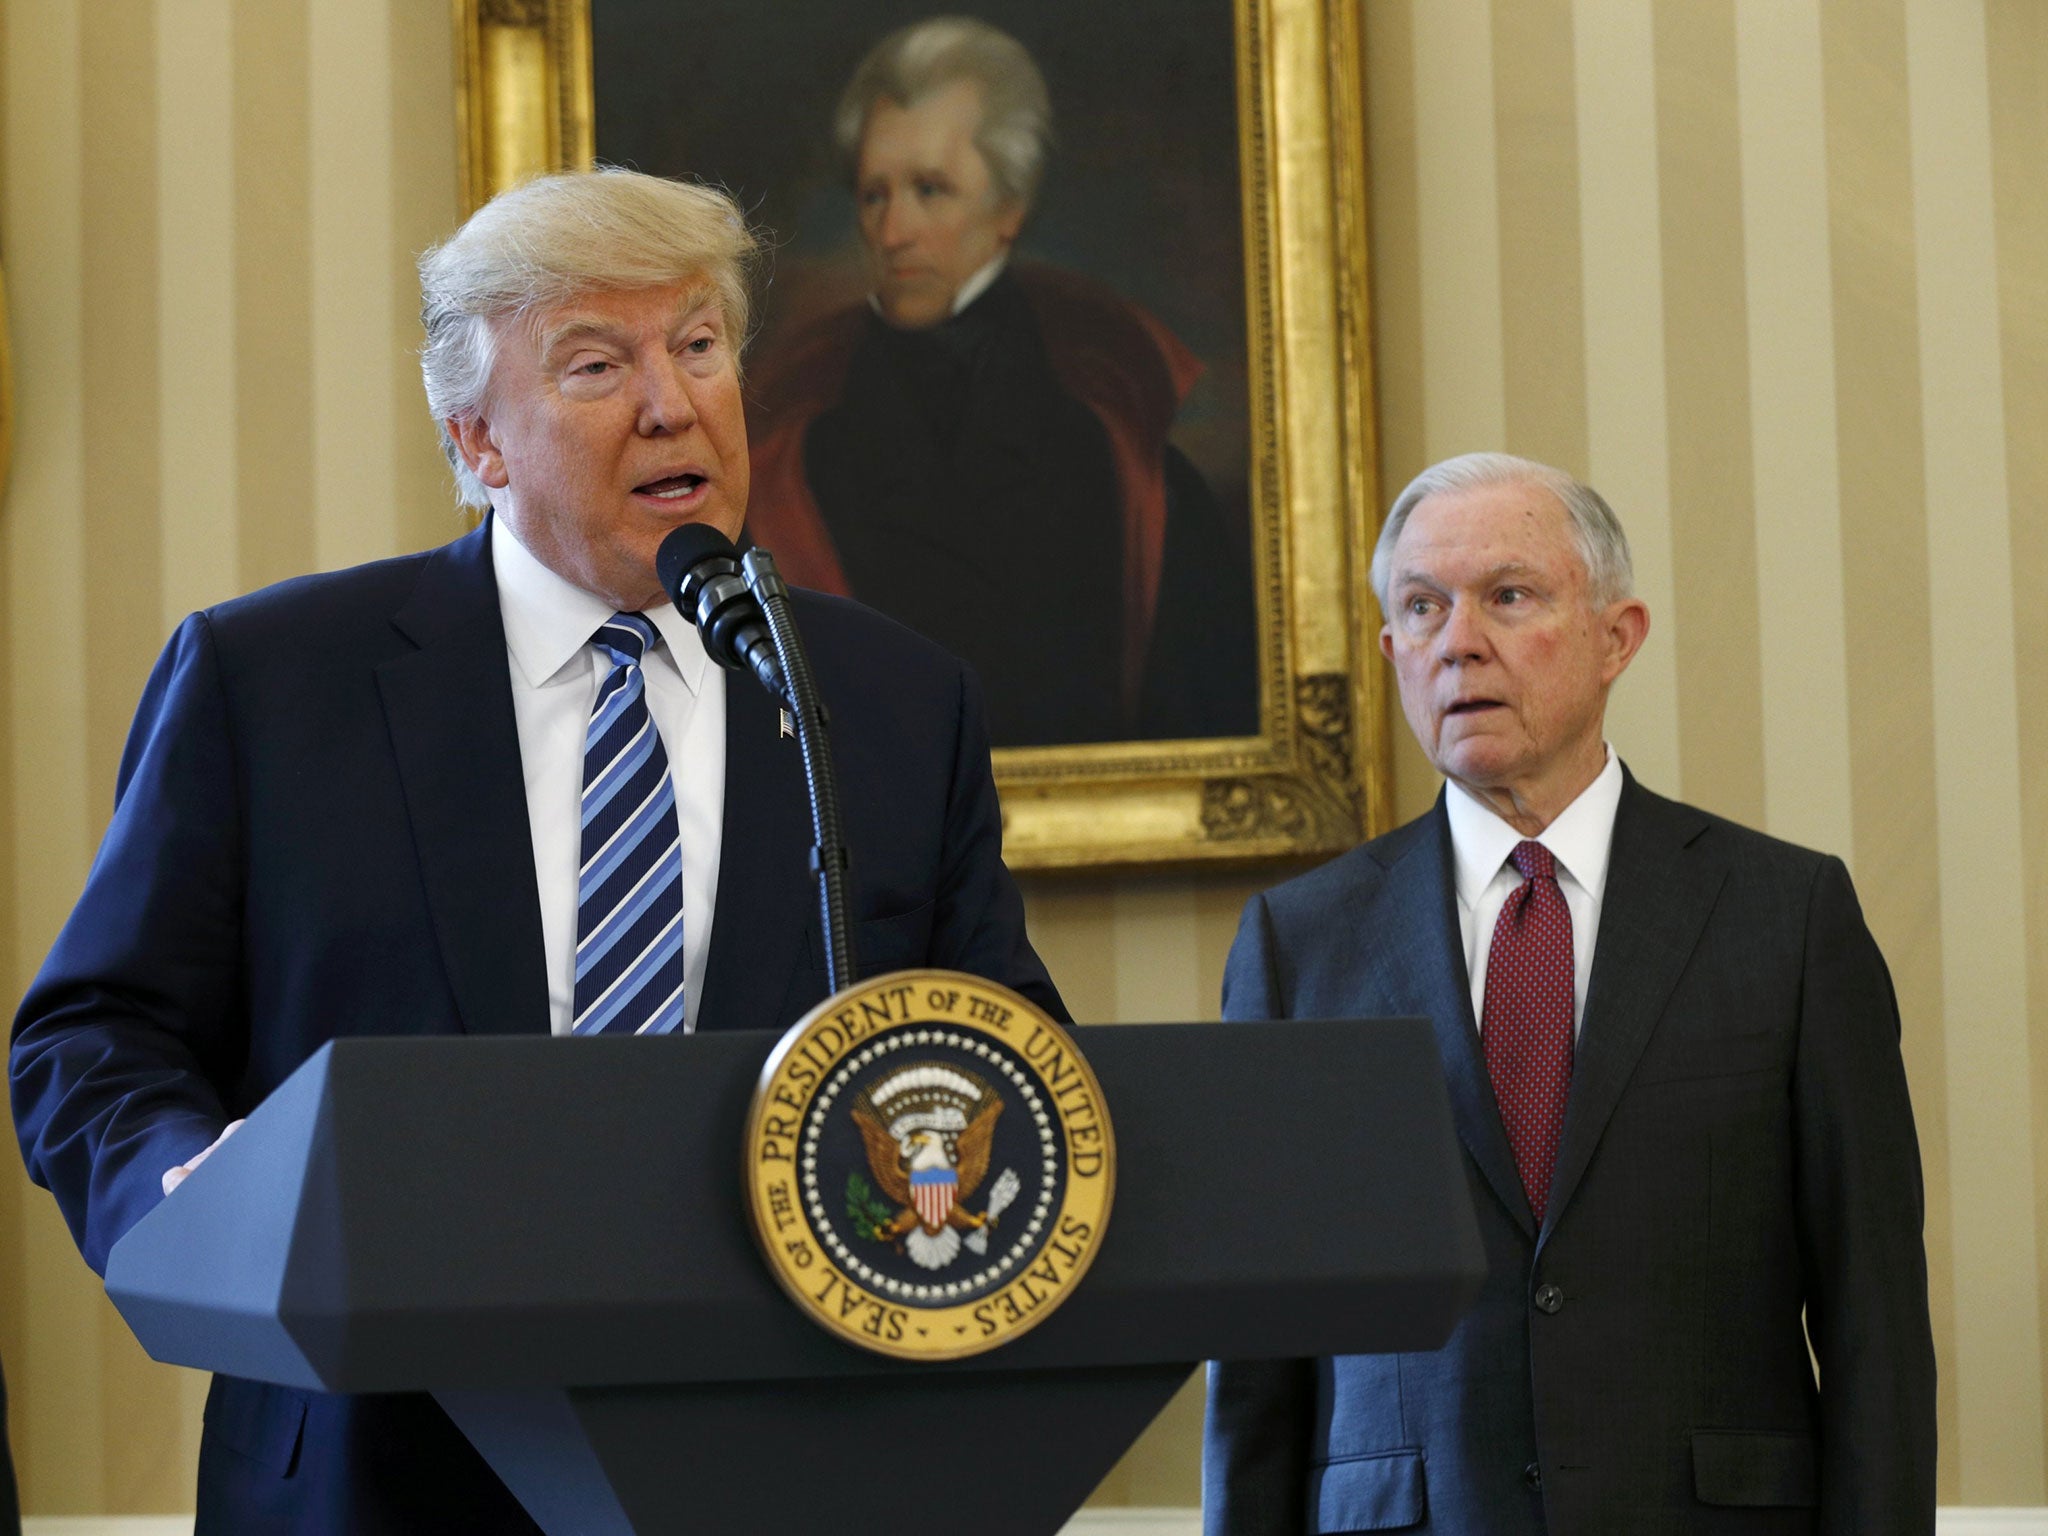 The most serious of the claims maintains that the US President’s new Attorney General, Jeff Sessions, met twice with the Russian ambassador during the 2016 election